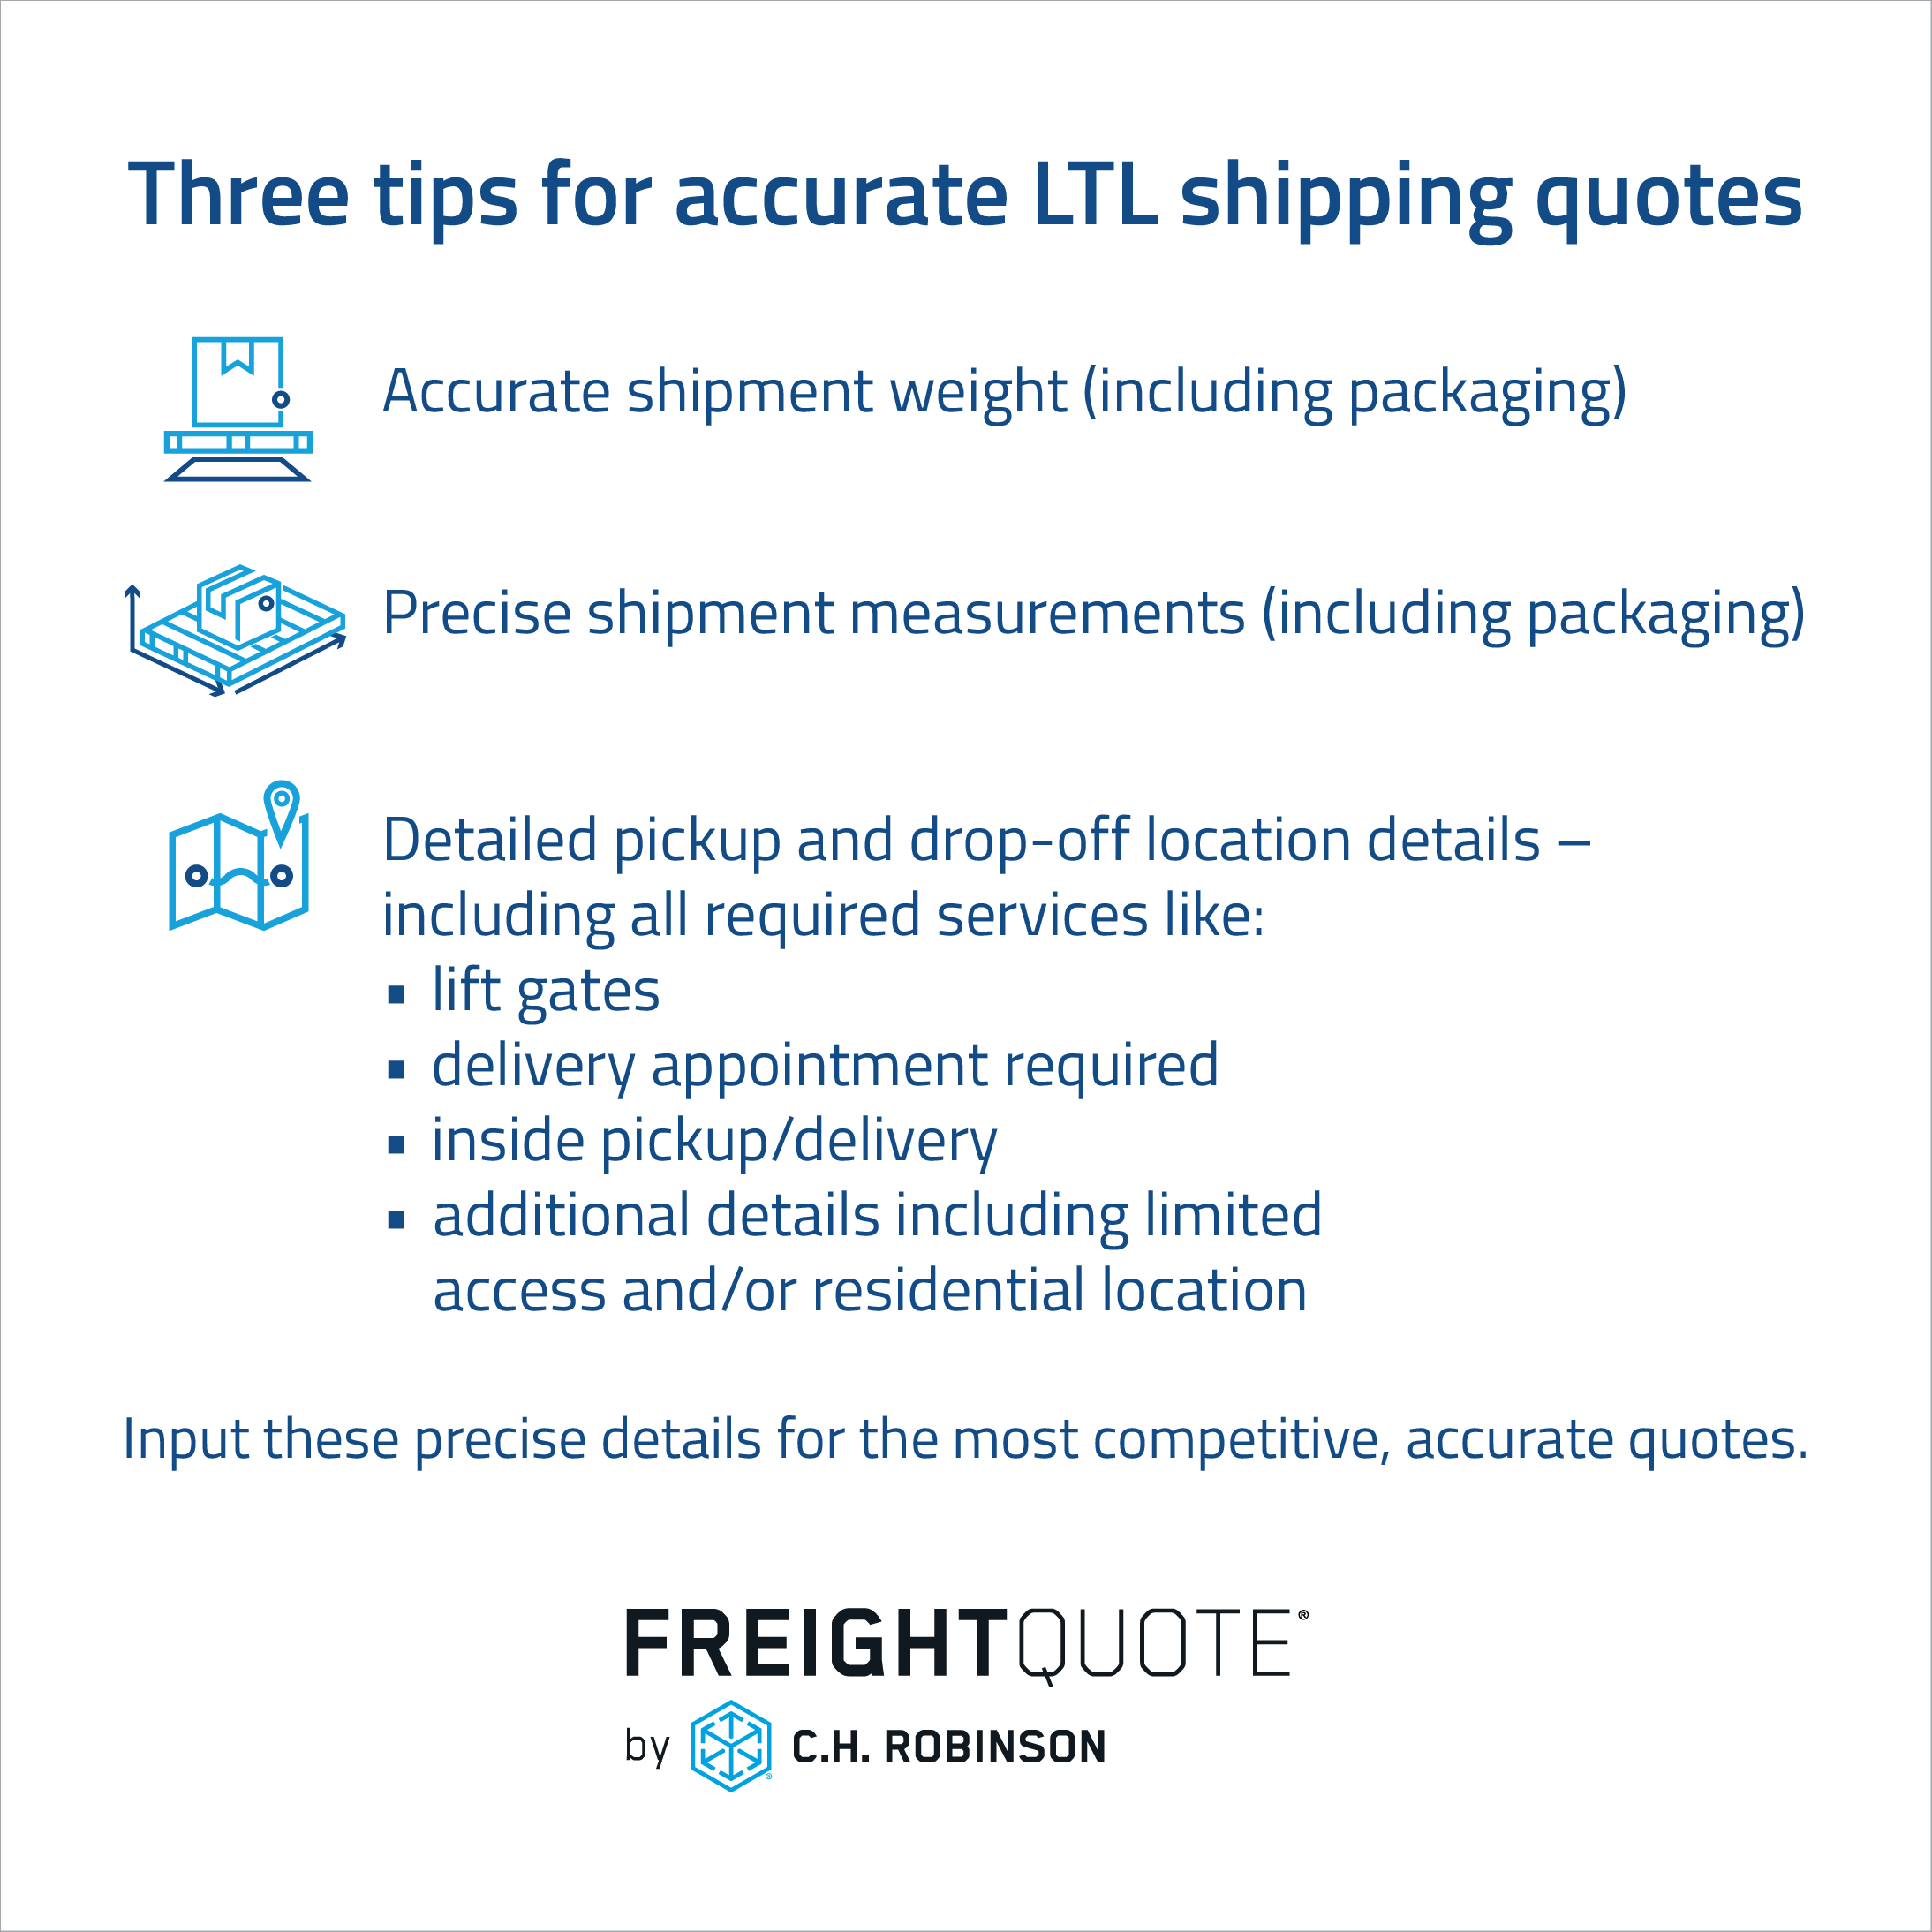 Three tips for accurate LTL shipping quotes